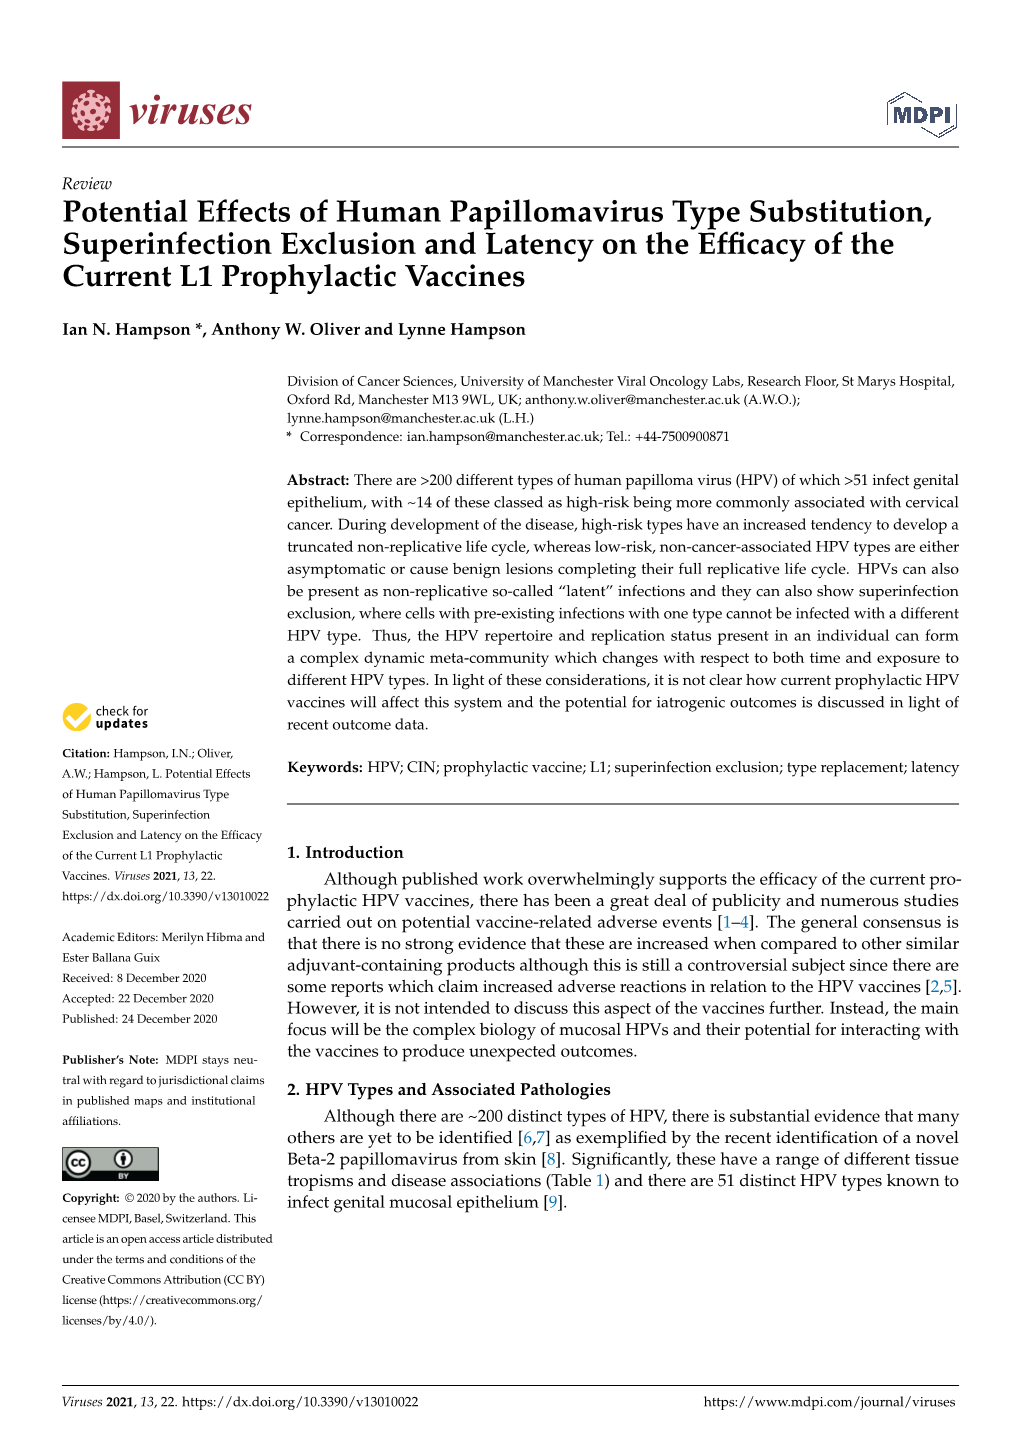 Potential Effects of Human Papillomavirus Type Substitution, Superinfection Exclusion and Latency on the Efﬁcacy of the Current L1 Prophylactic Vaccines